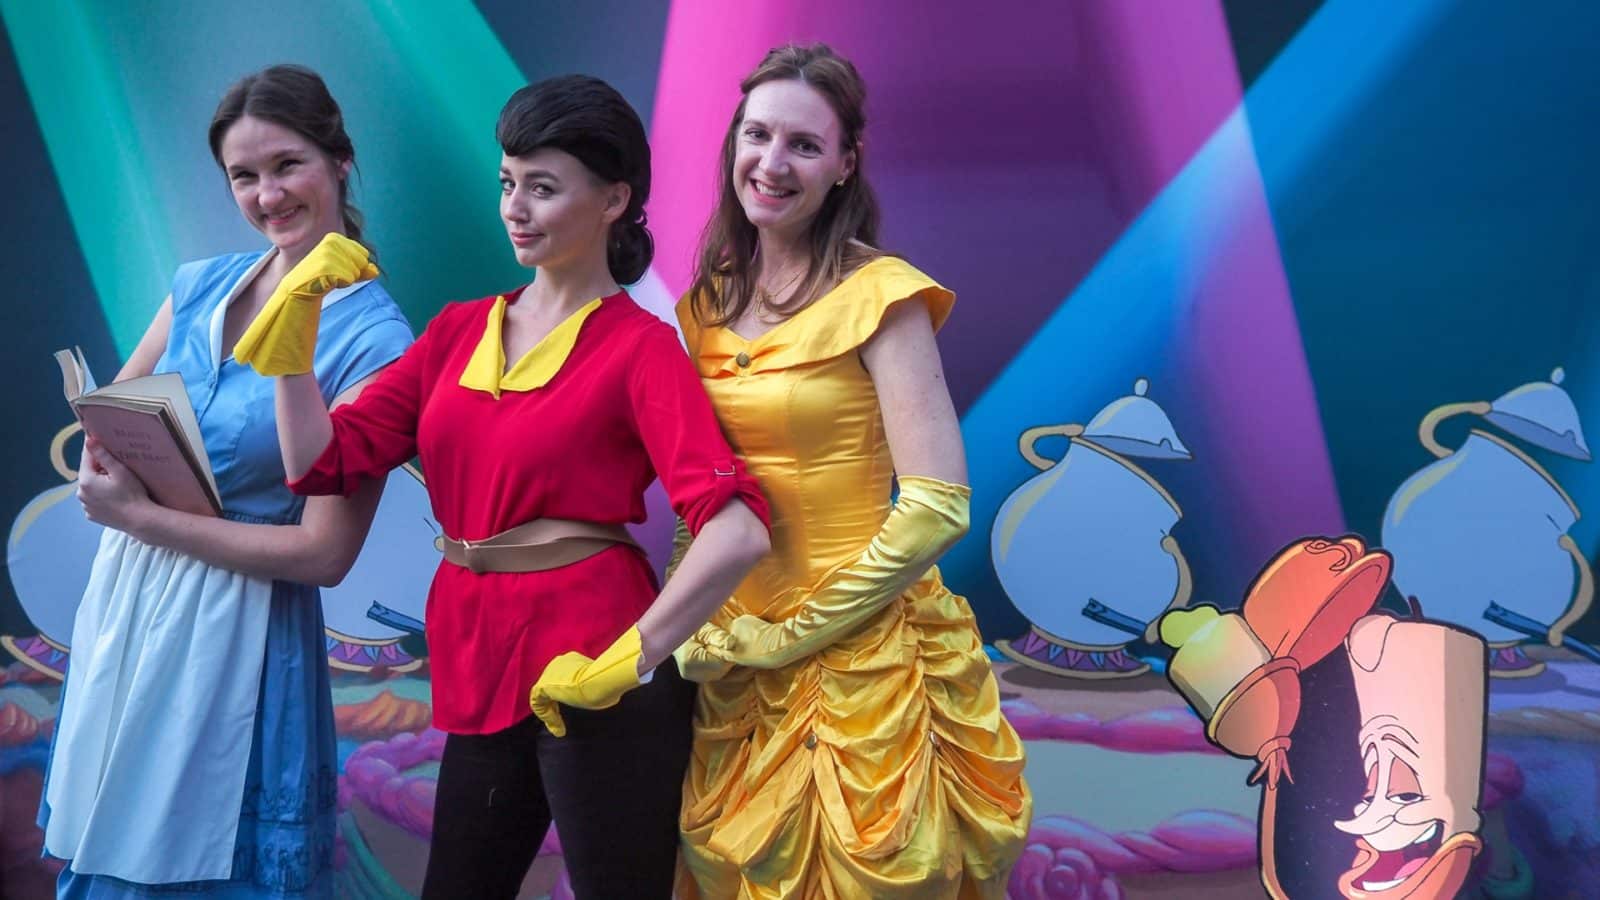 Three actors dressed as disney characters from Beauty and the Beast, booked by our talent booking services.